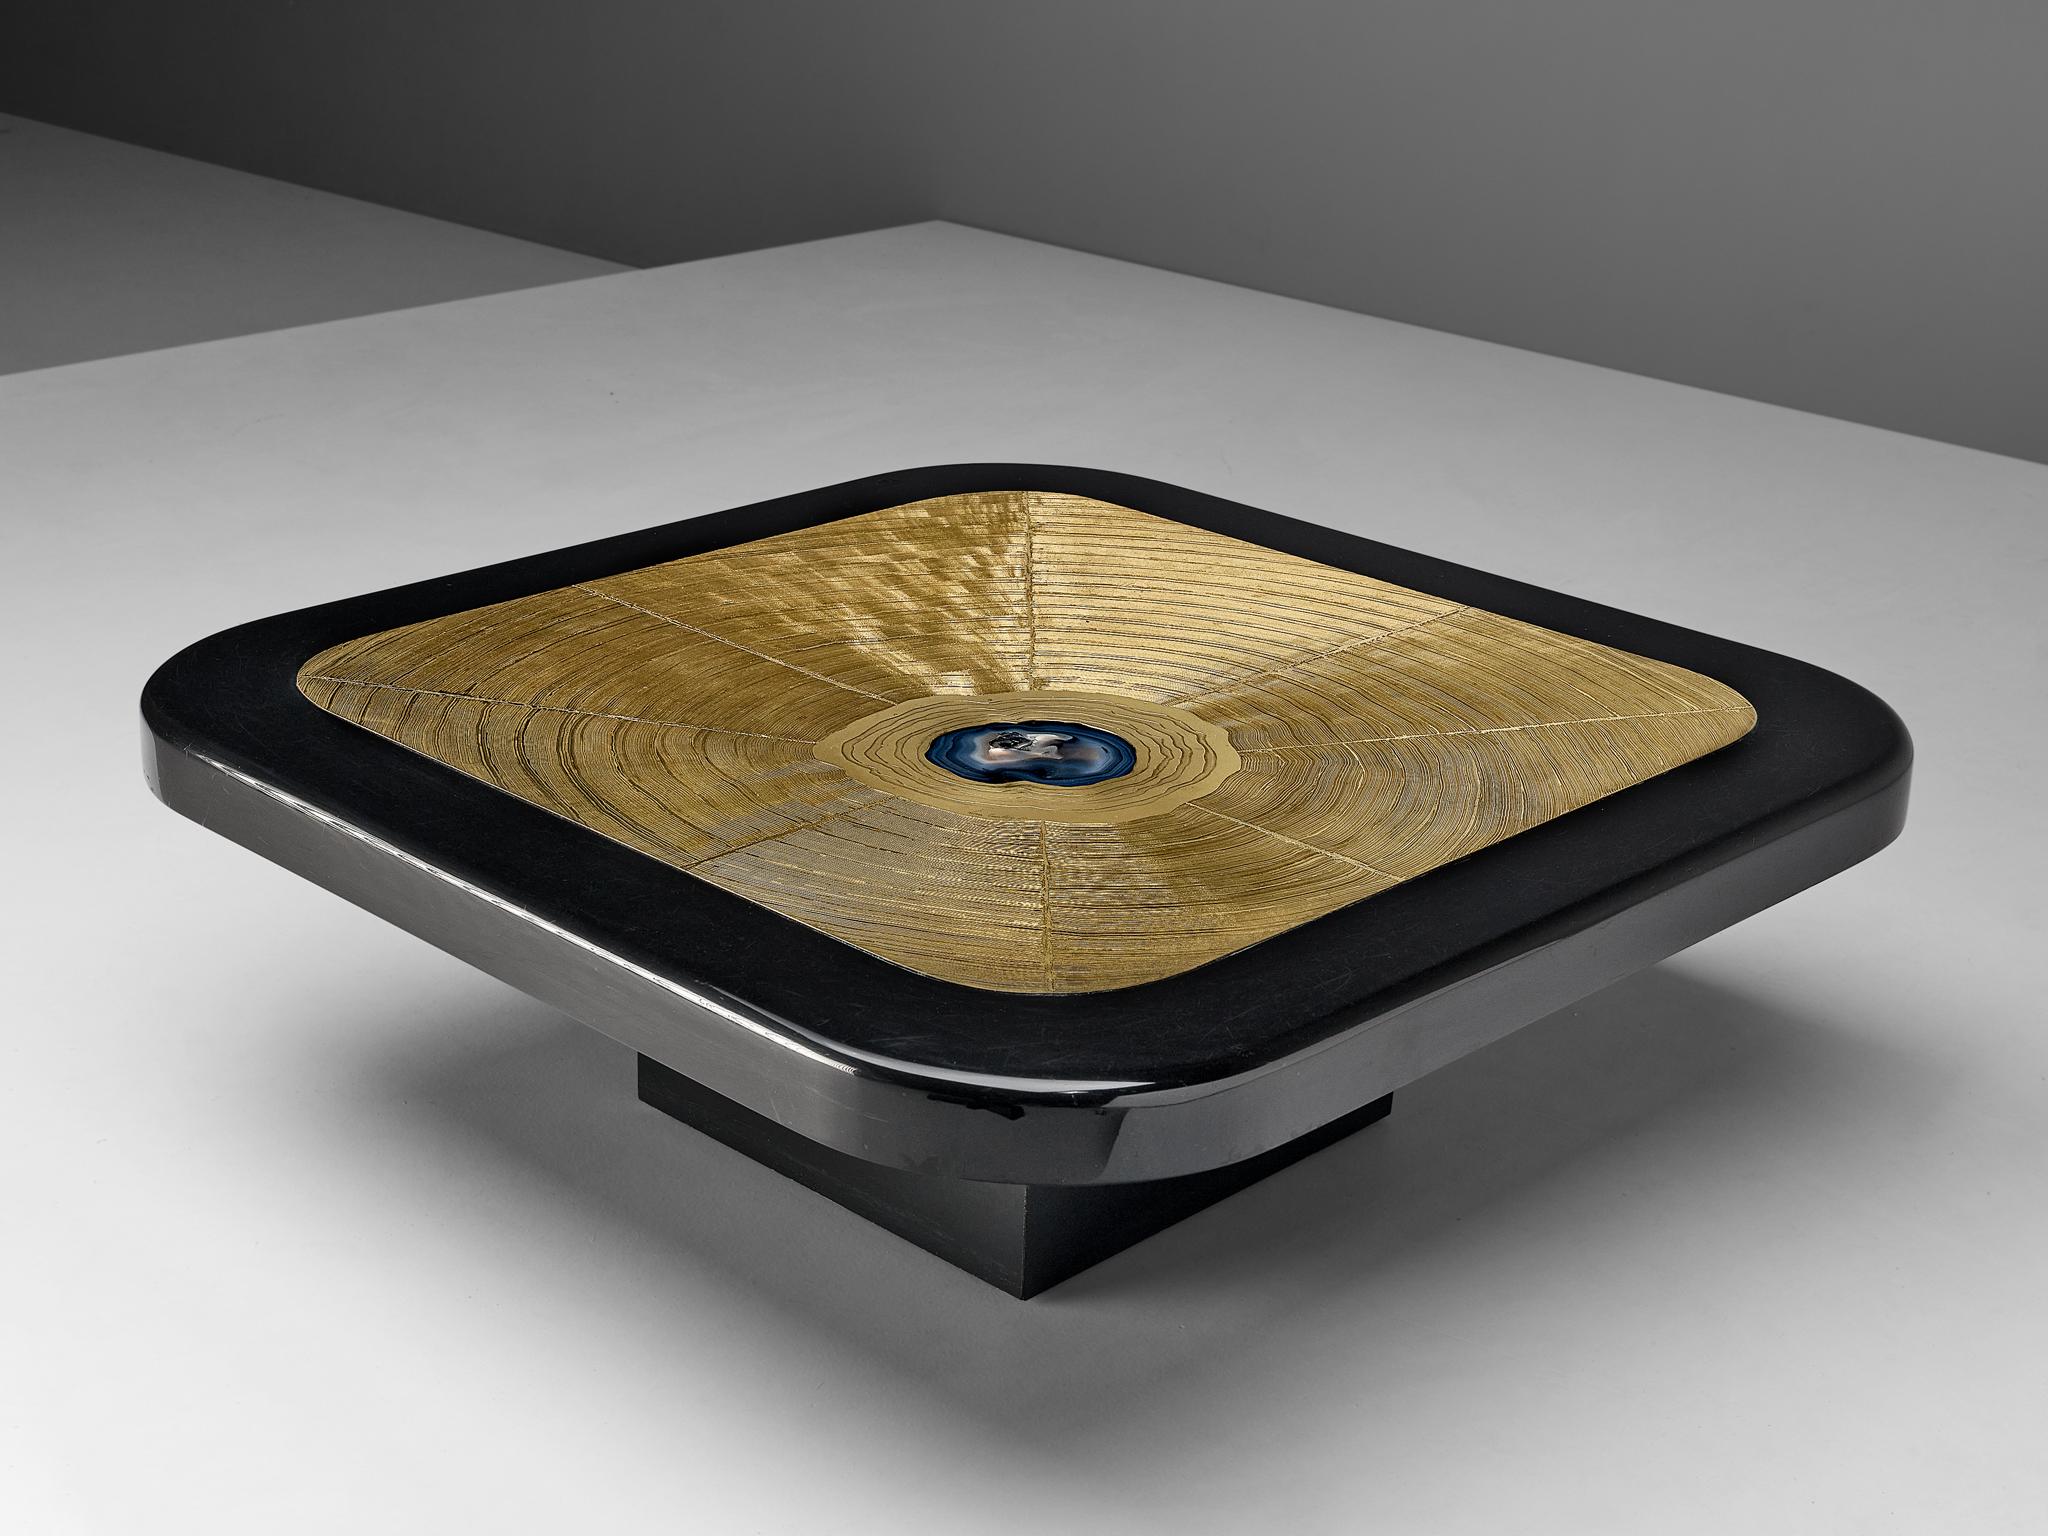 Lova Creation coffee table, brass, metal, wood, agate, Belgium, 1987

This luxurious side table by Lova Creation is a dazzling eyecatcher. The golden square tabletop is signed and shows a pattern of large abstract brush strokes. The center is